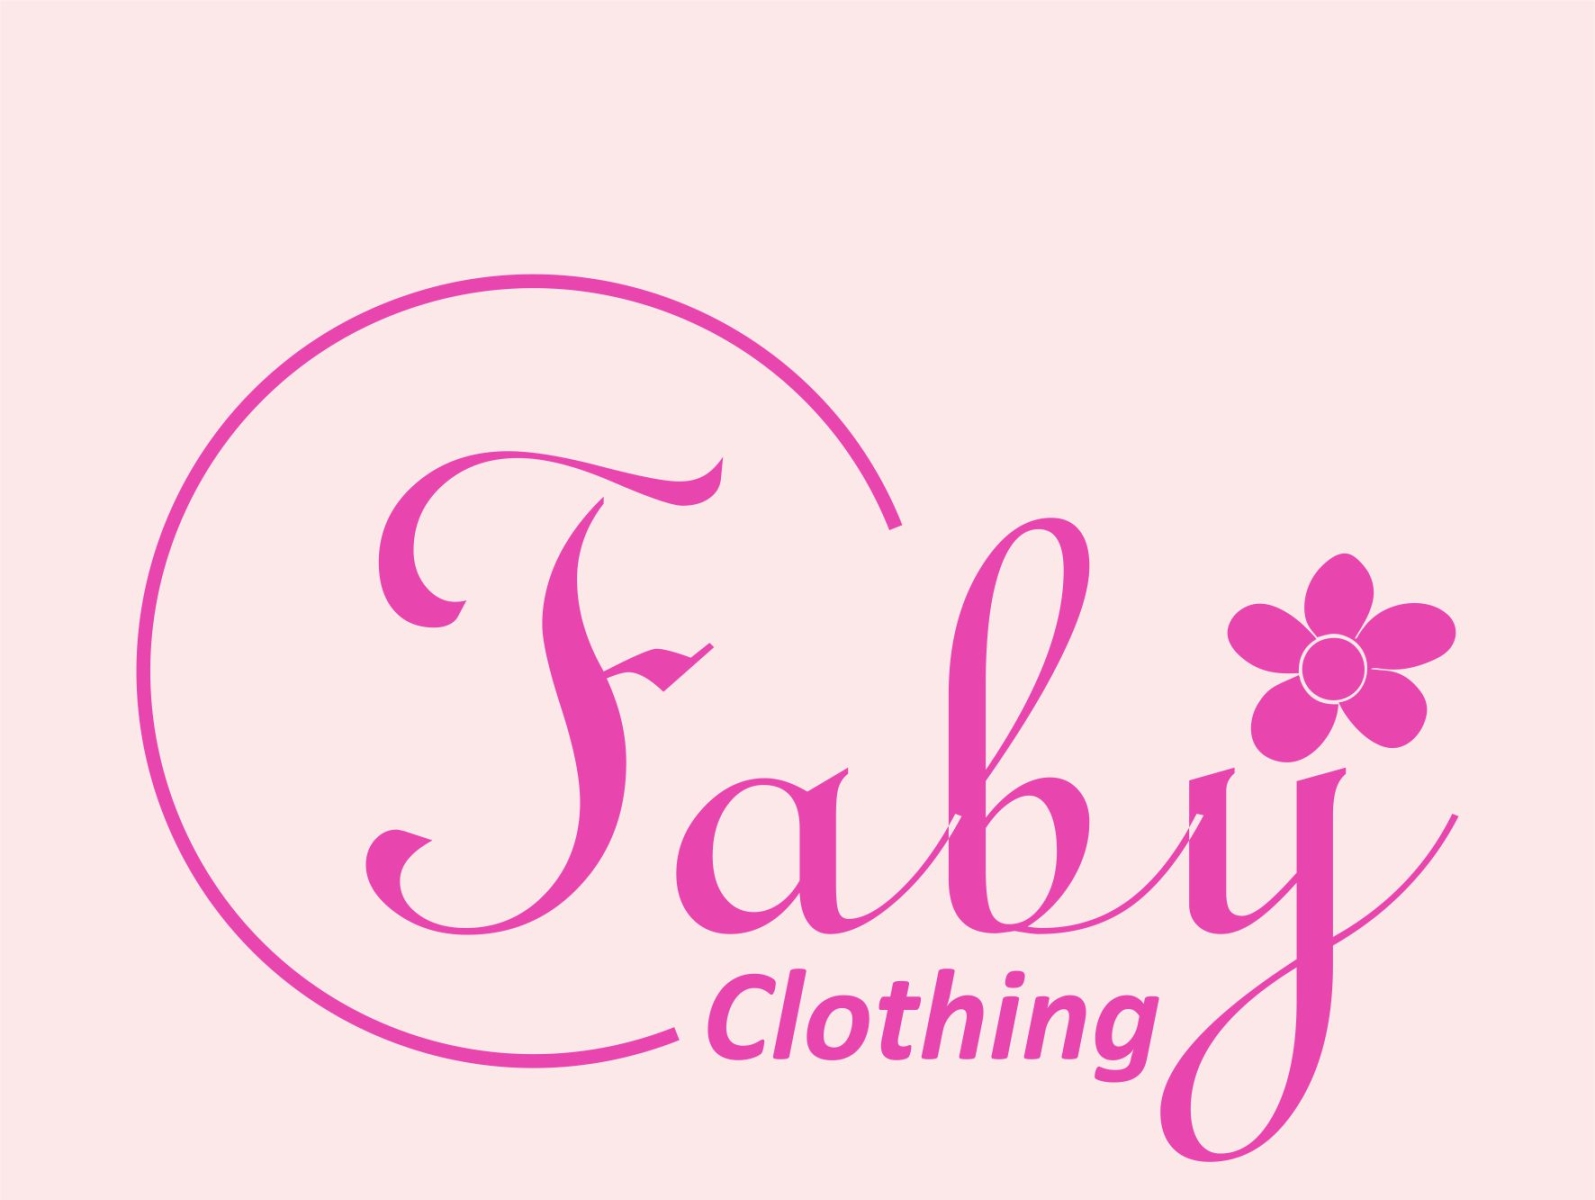 Faby clothing, Logo Project by pams kuy on Dribbble